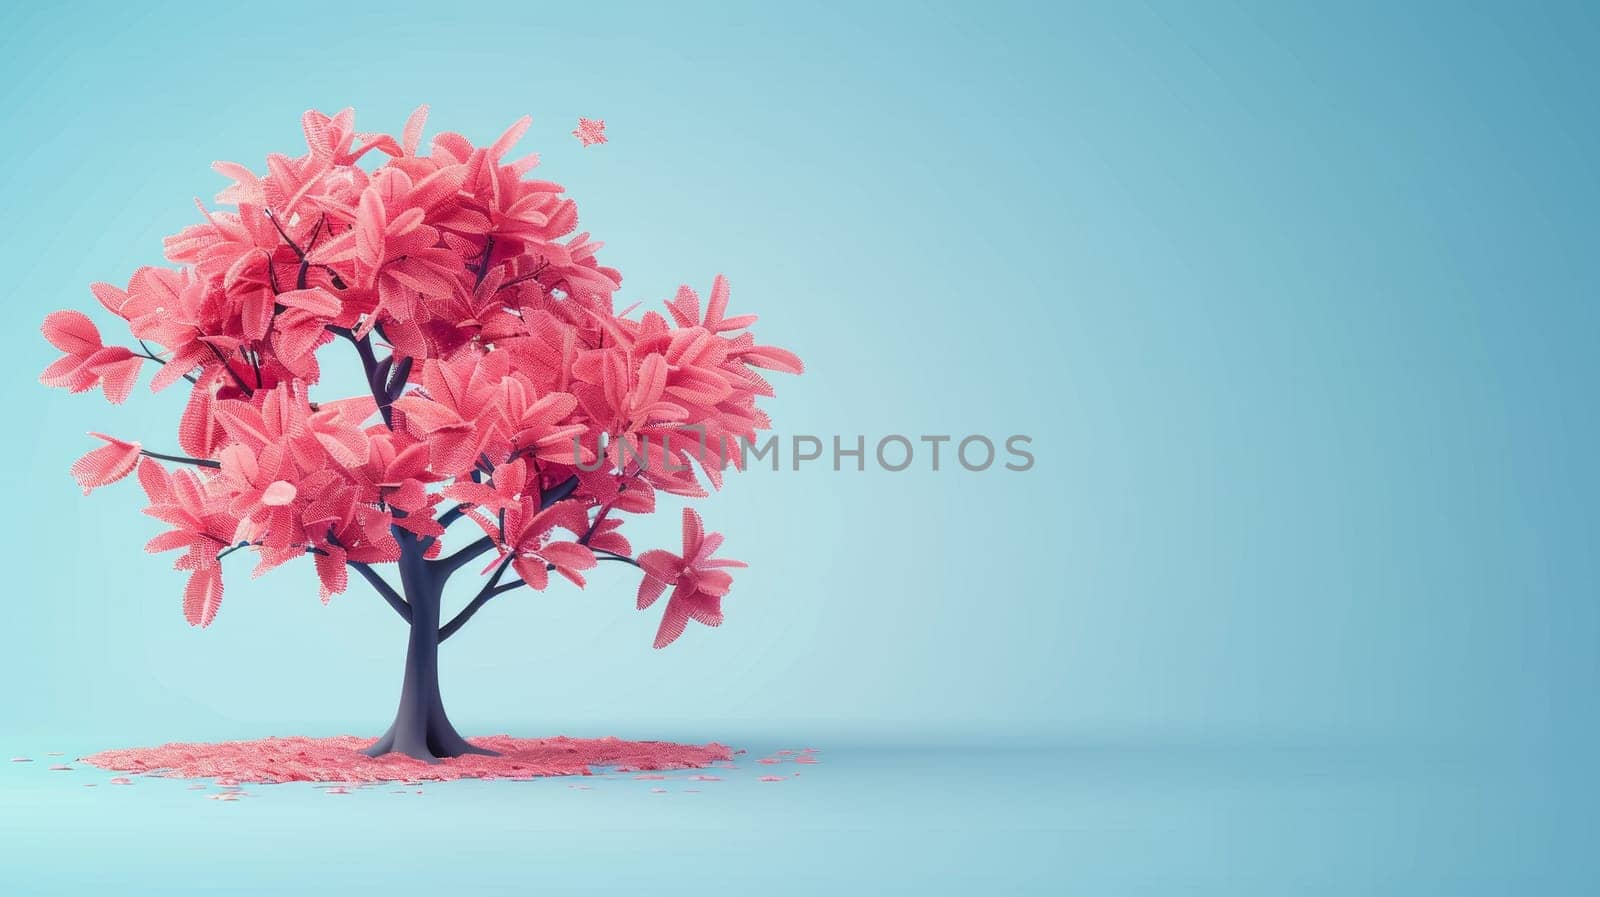 Pink Tree with Falling Leaves on Blue Background. Minimalist Nature Scene with Copy Space by ailike